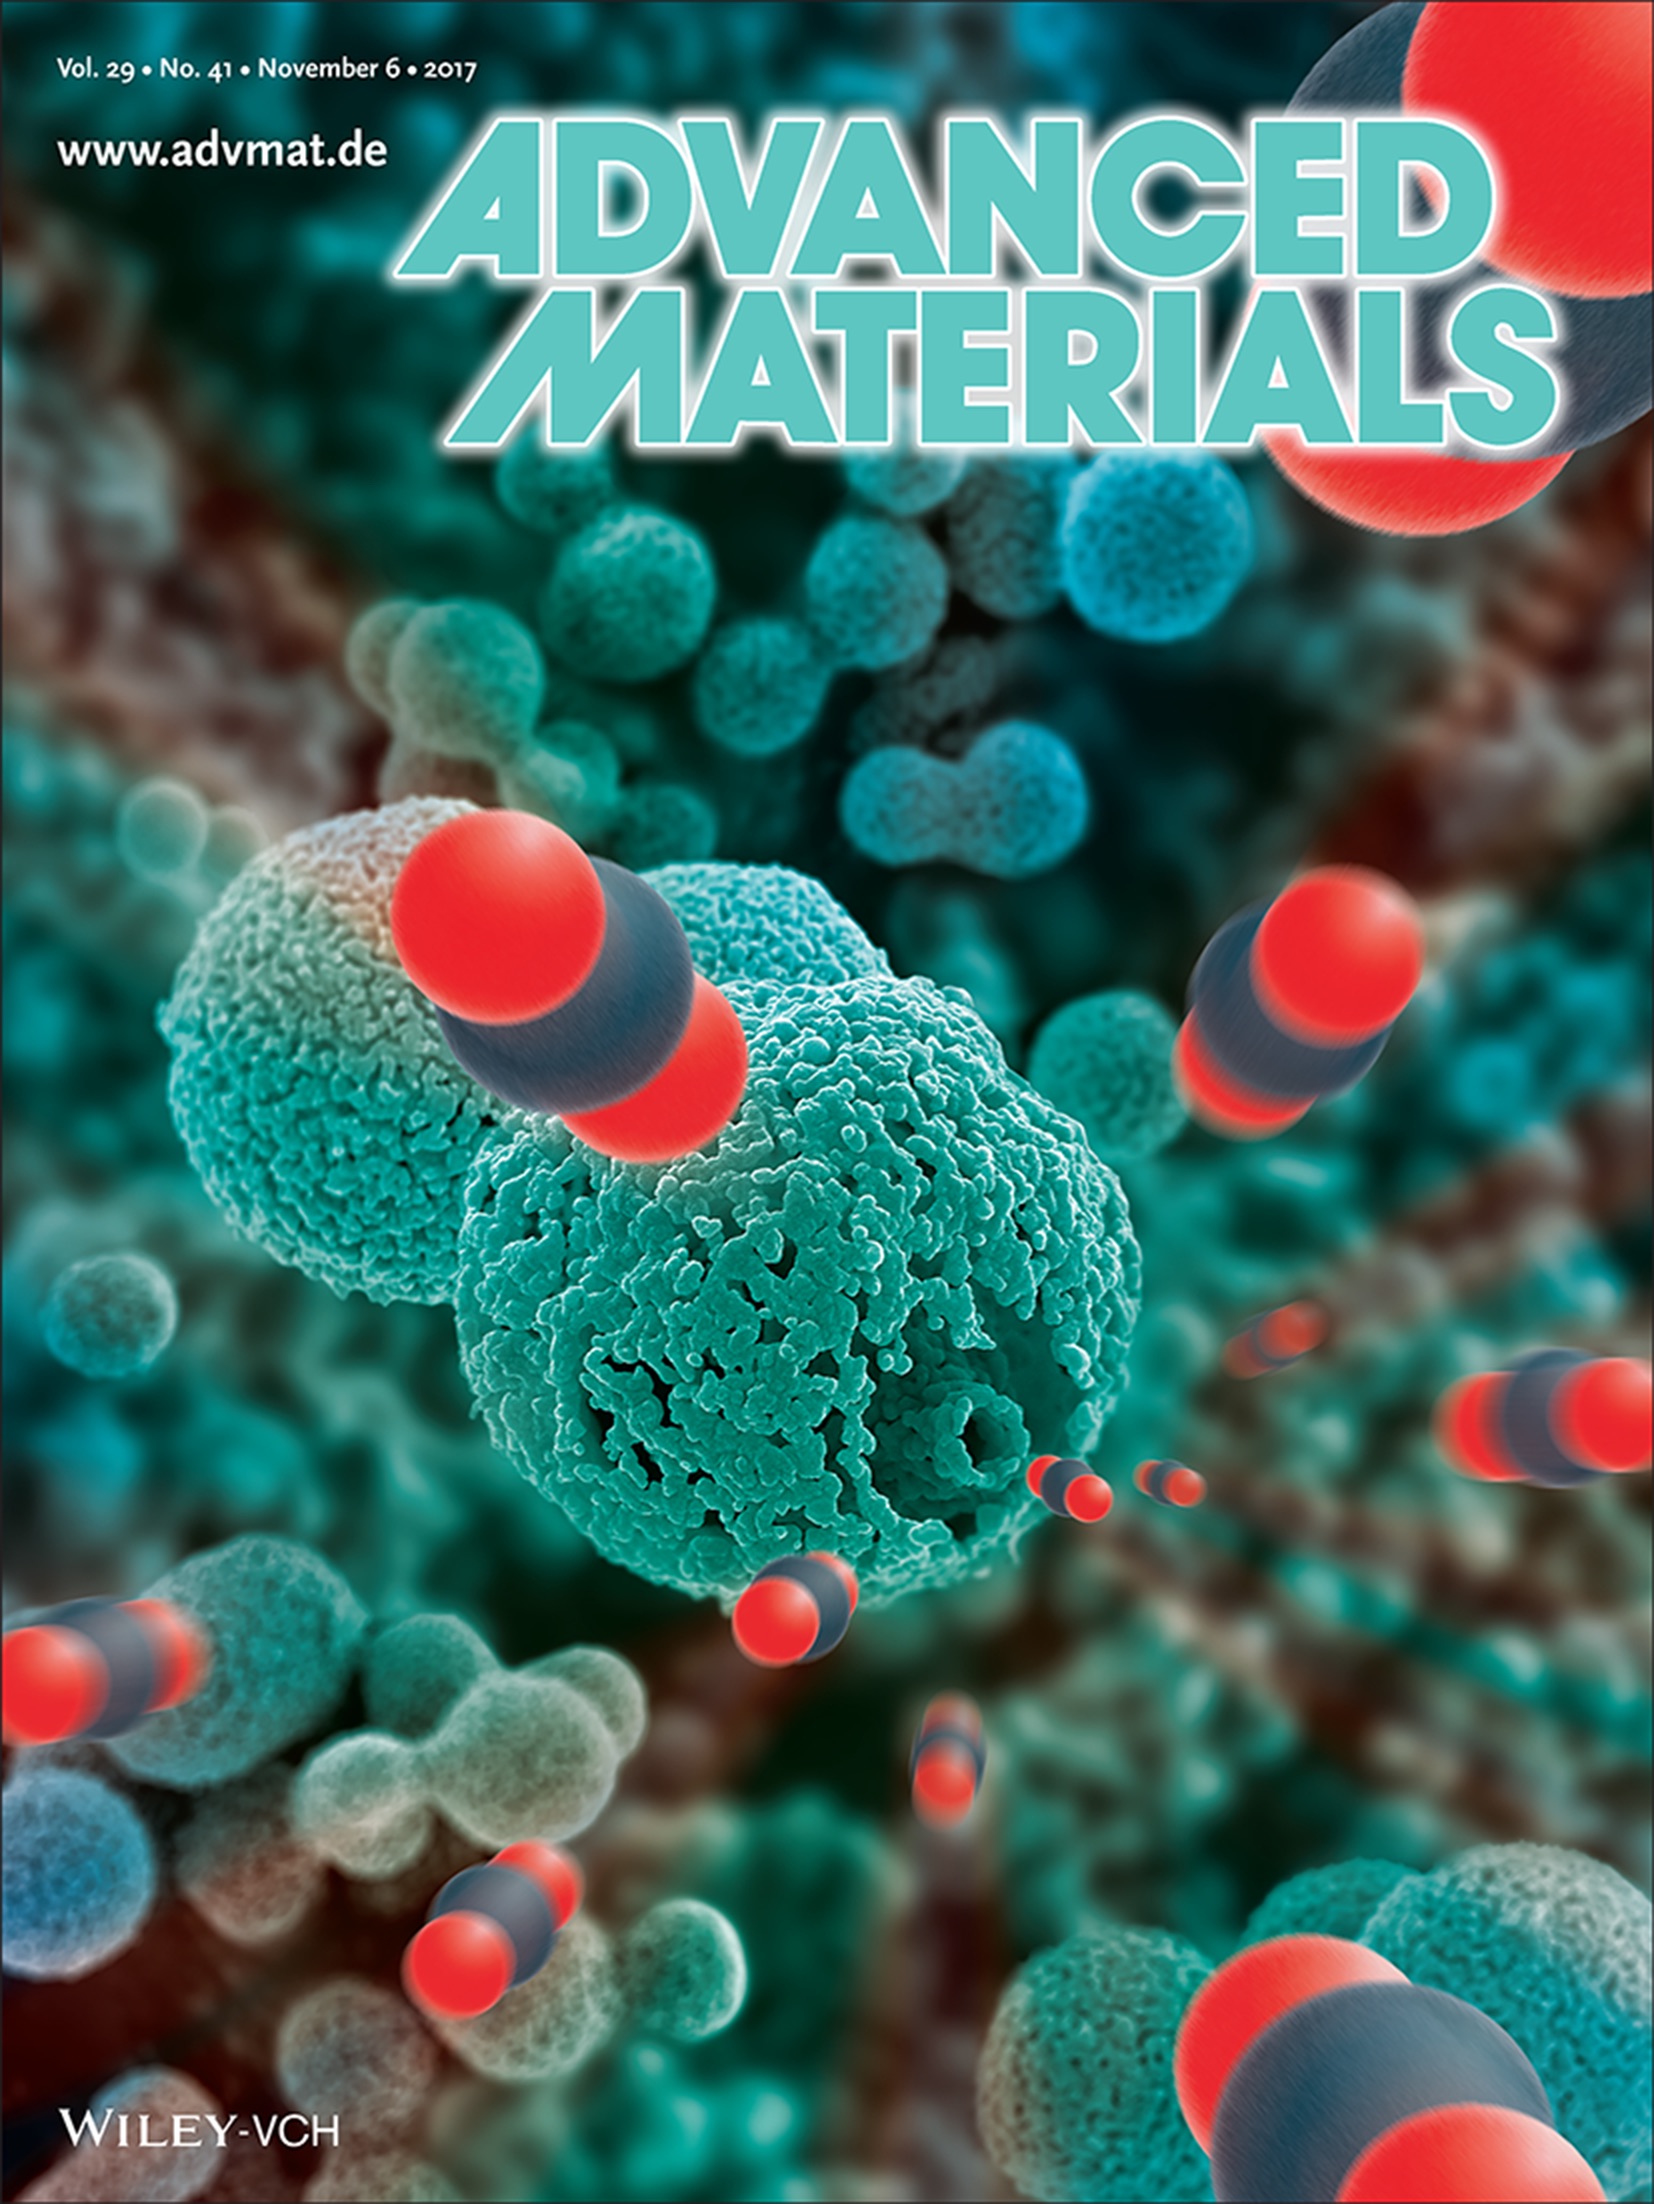 We are on Advanced Materials cover page! – Laboratory of Energy Science